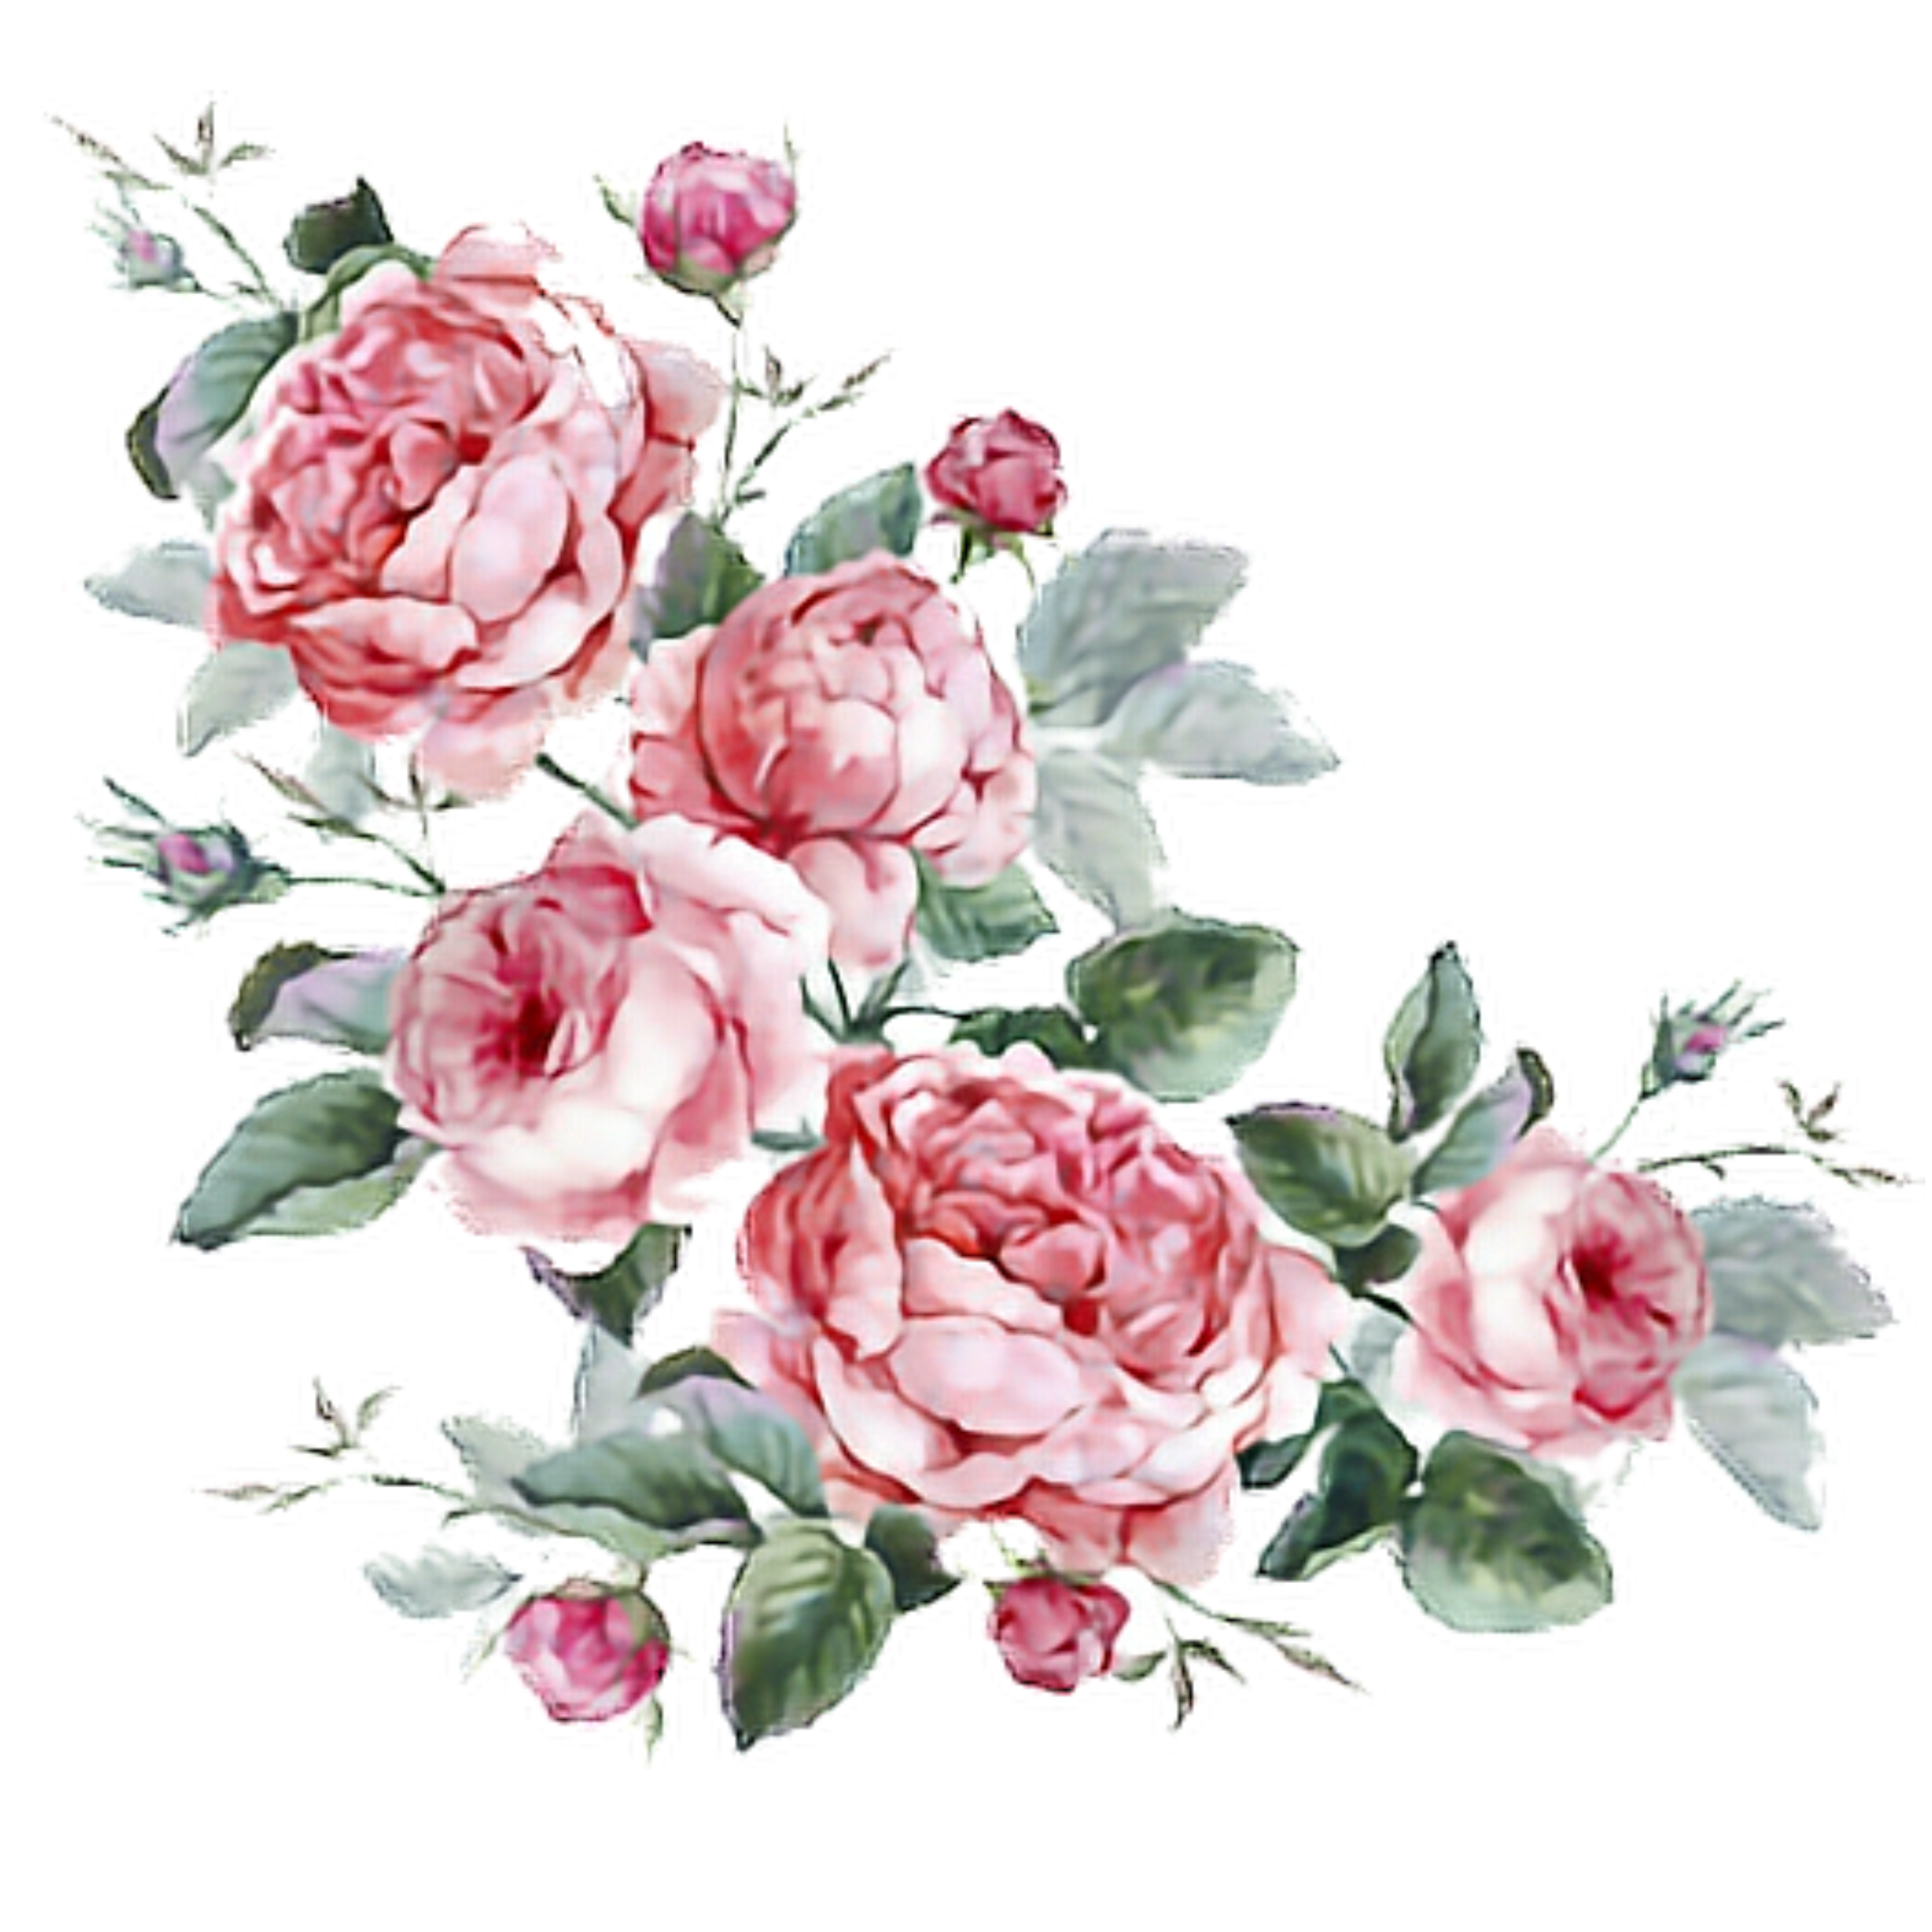 Download Transparent Aesthetic Flower Png | PNG & GIF BASE